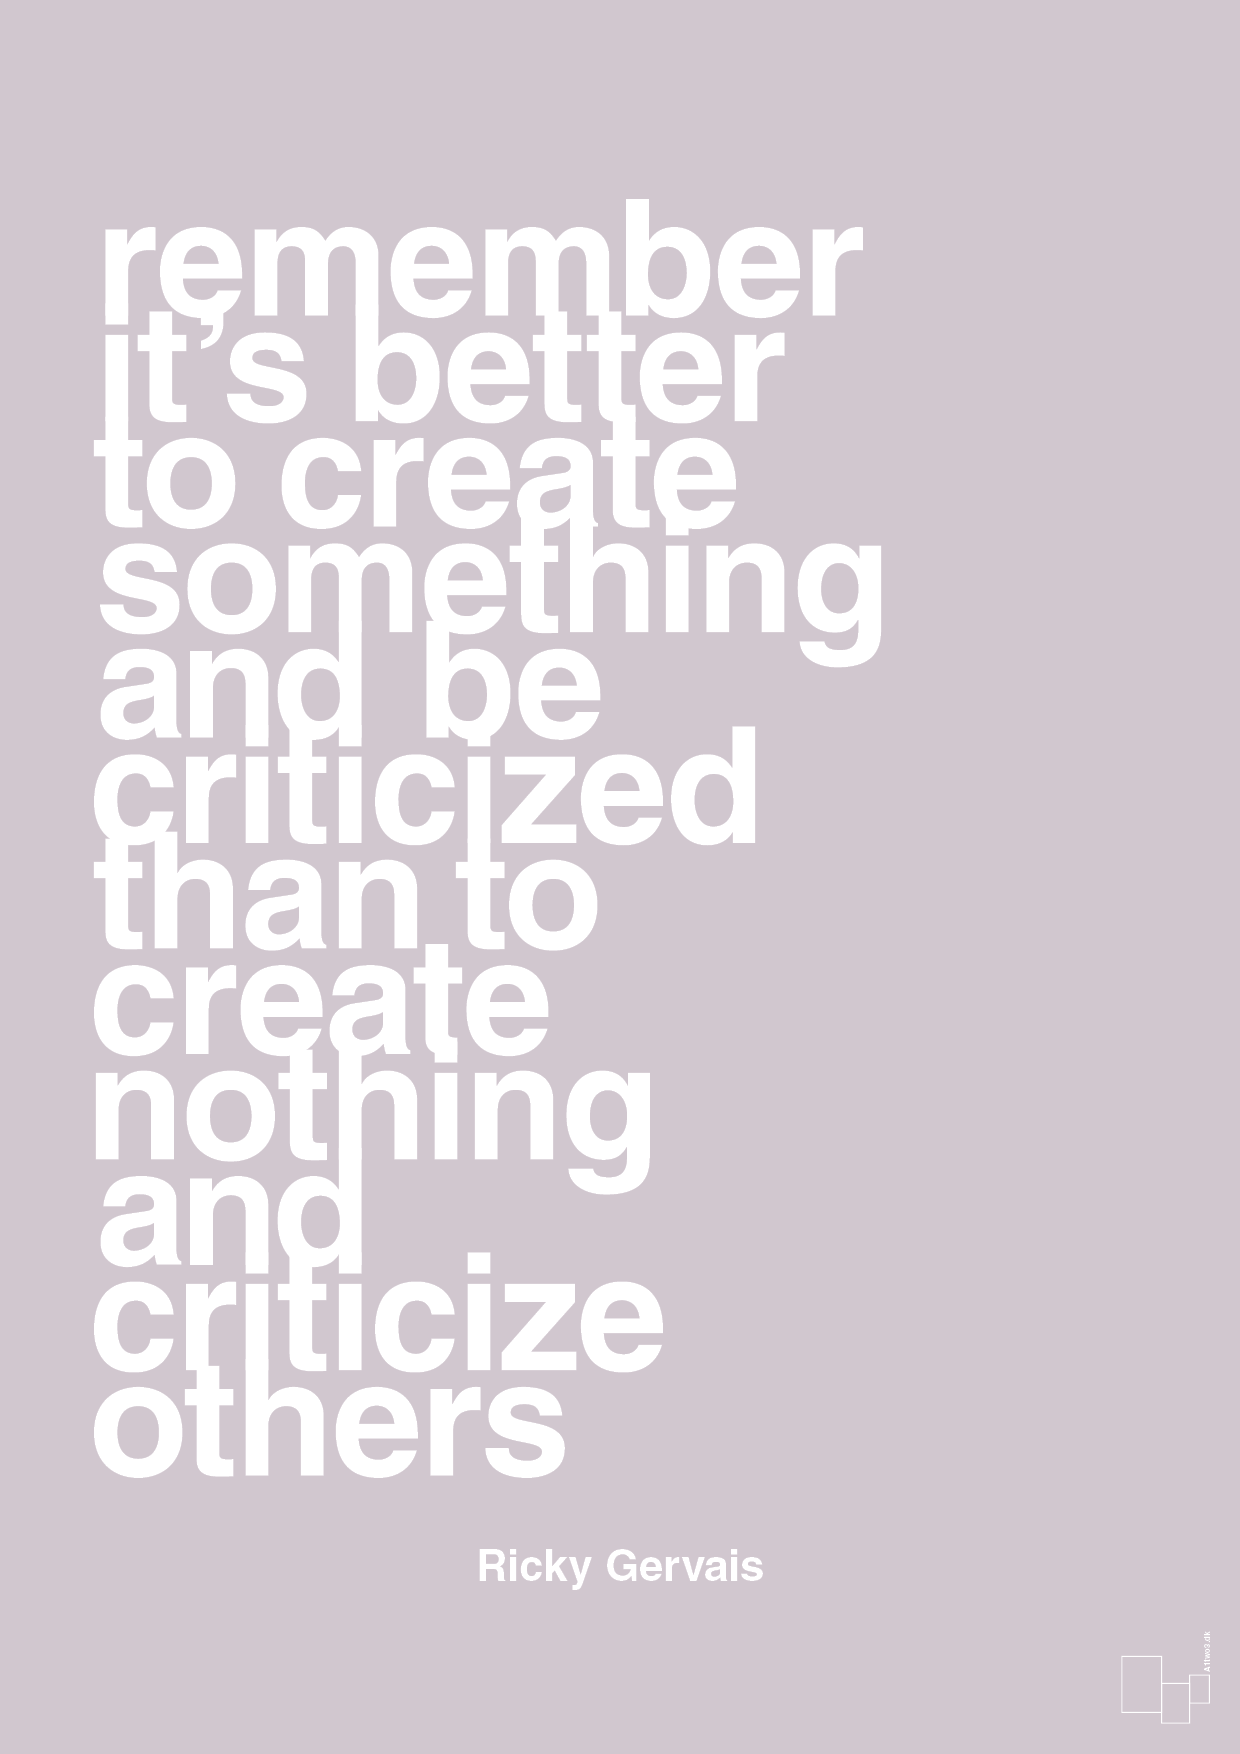 remember its better to create something and be criticized than create nothing and criticize others - Plakat med Citater i Dusty Lilac